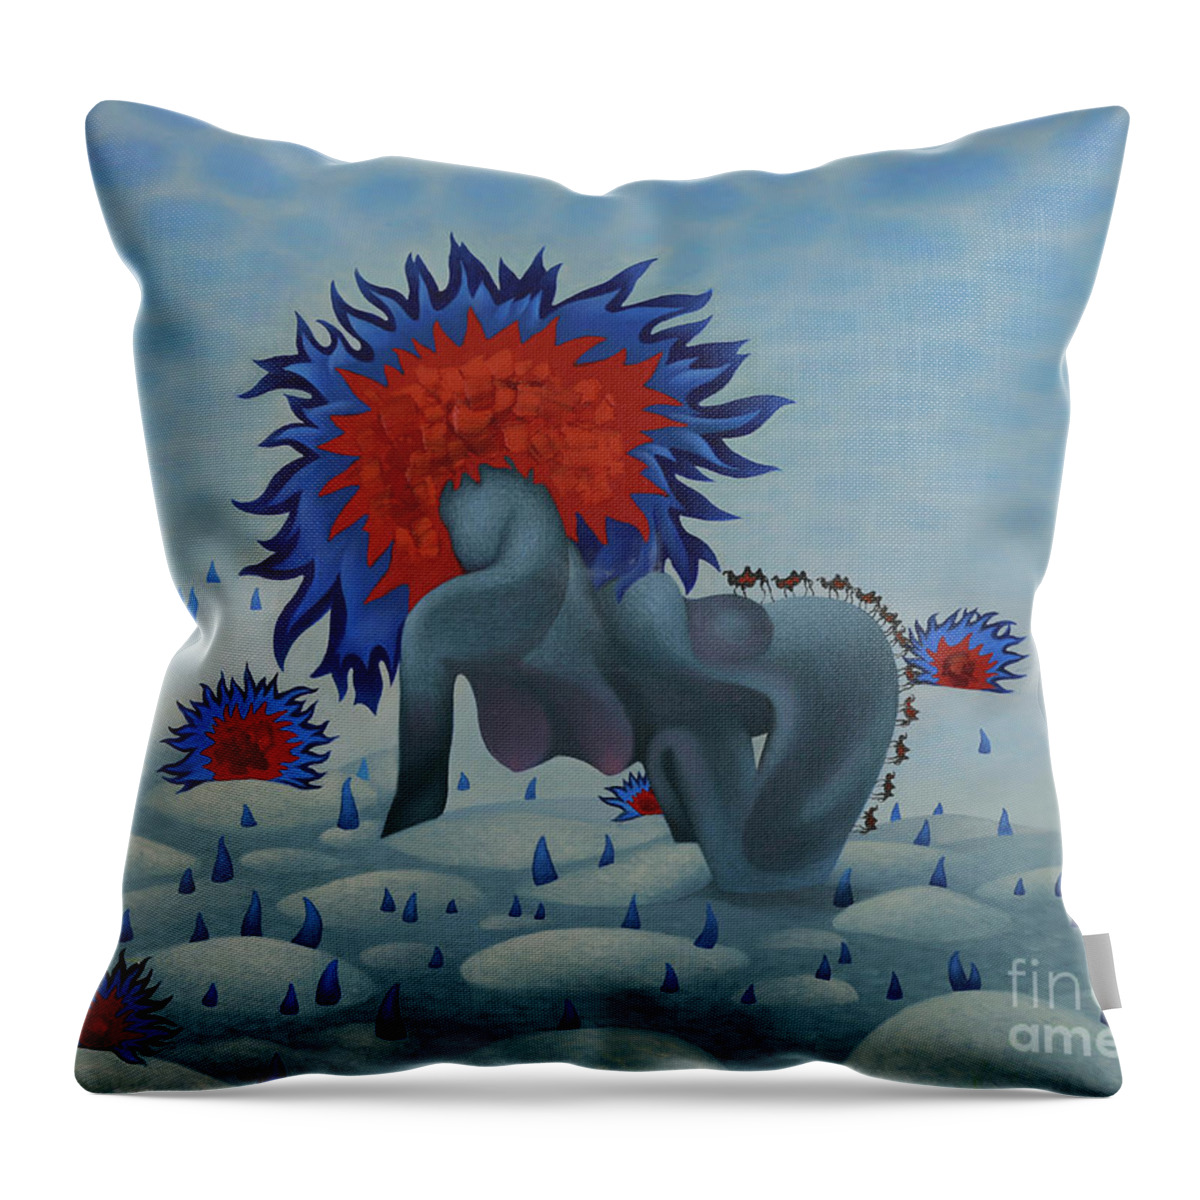 Mongolian Throw Pillow featuring the painting Choijin Spring by Tsegmid Tserennadmid